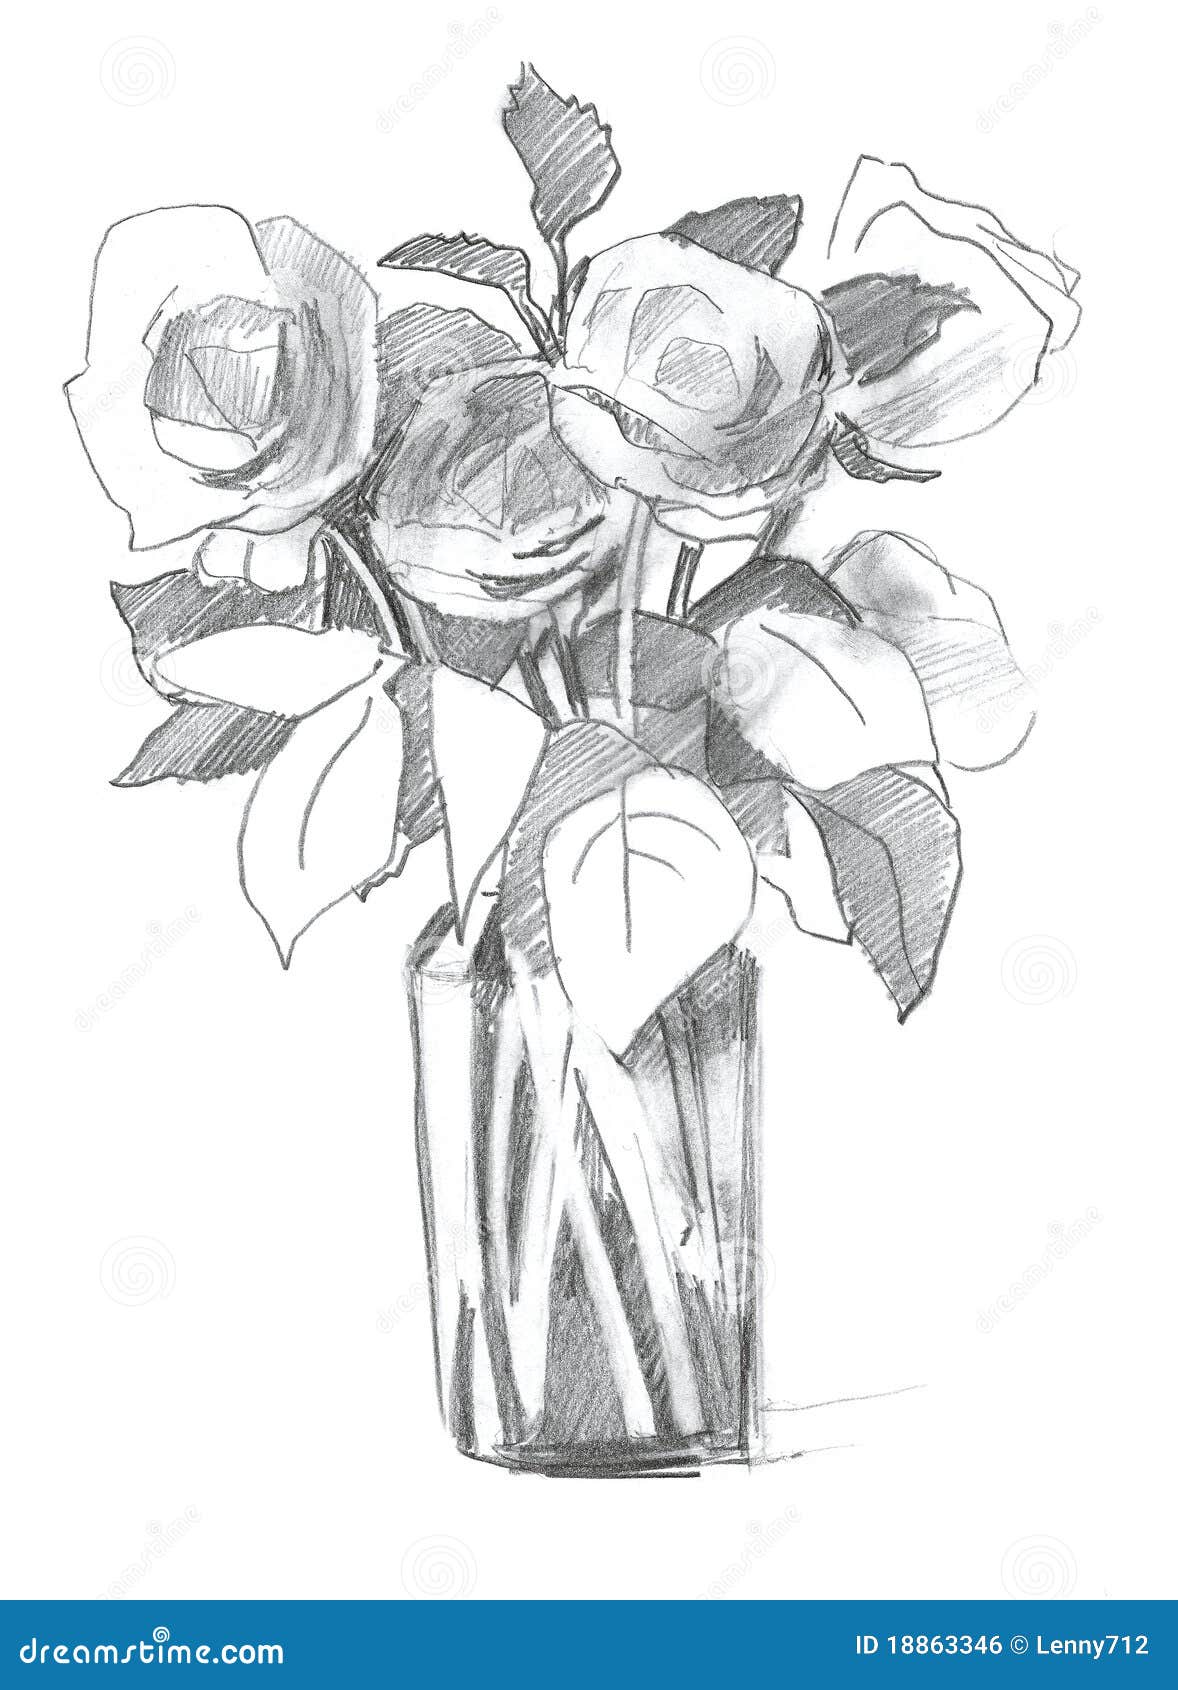 Still Life - Vase with White Flowers Drawing by Jose A Gonzalez Jr - Pixels